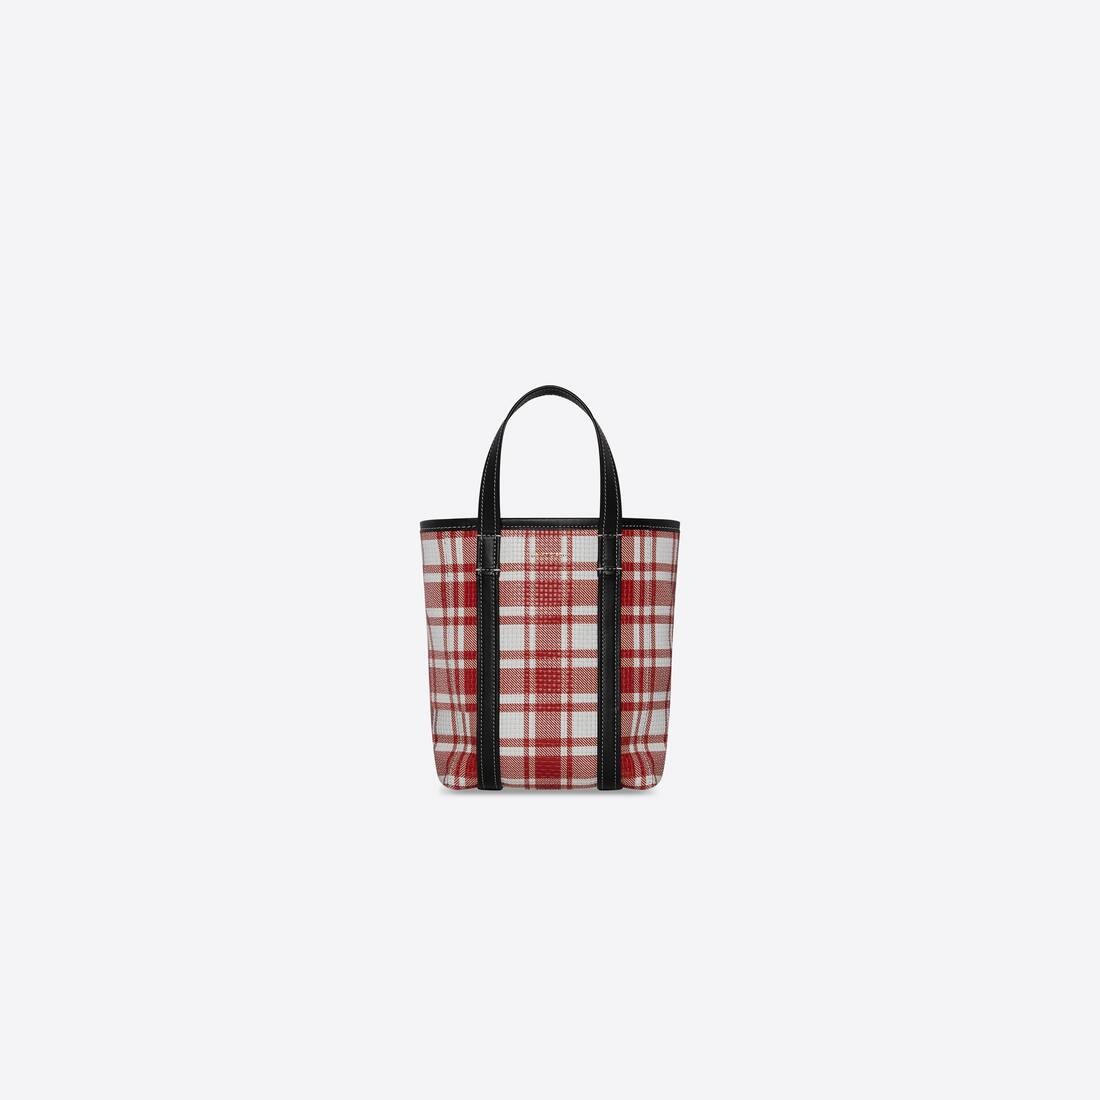 Women's Barbes Small North-south Shopper Bag Check Printed in Red - 1